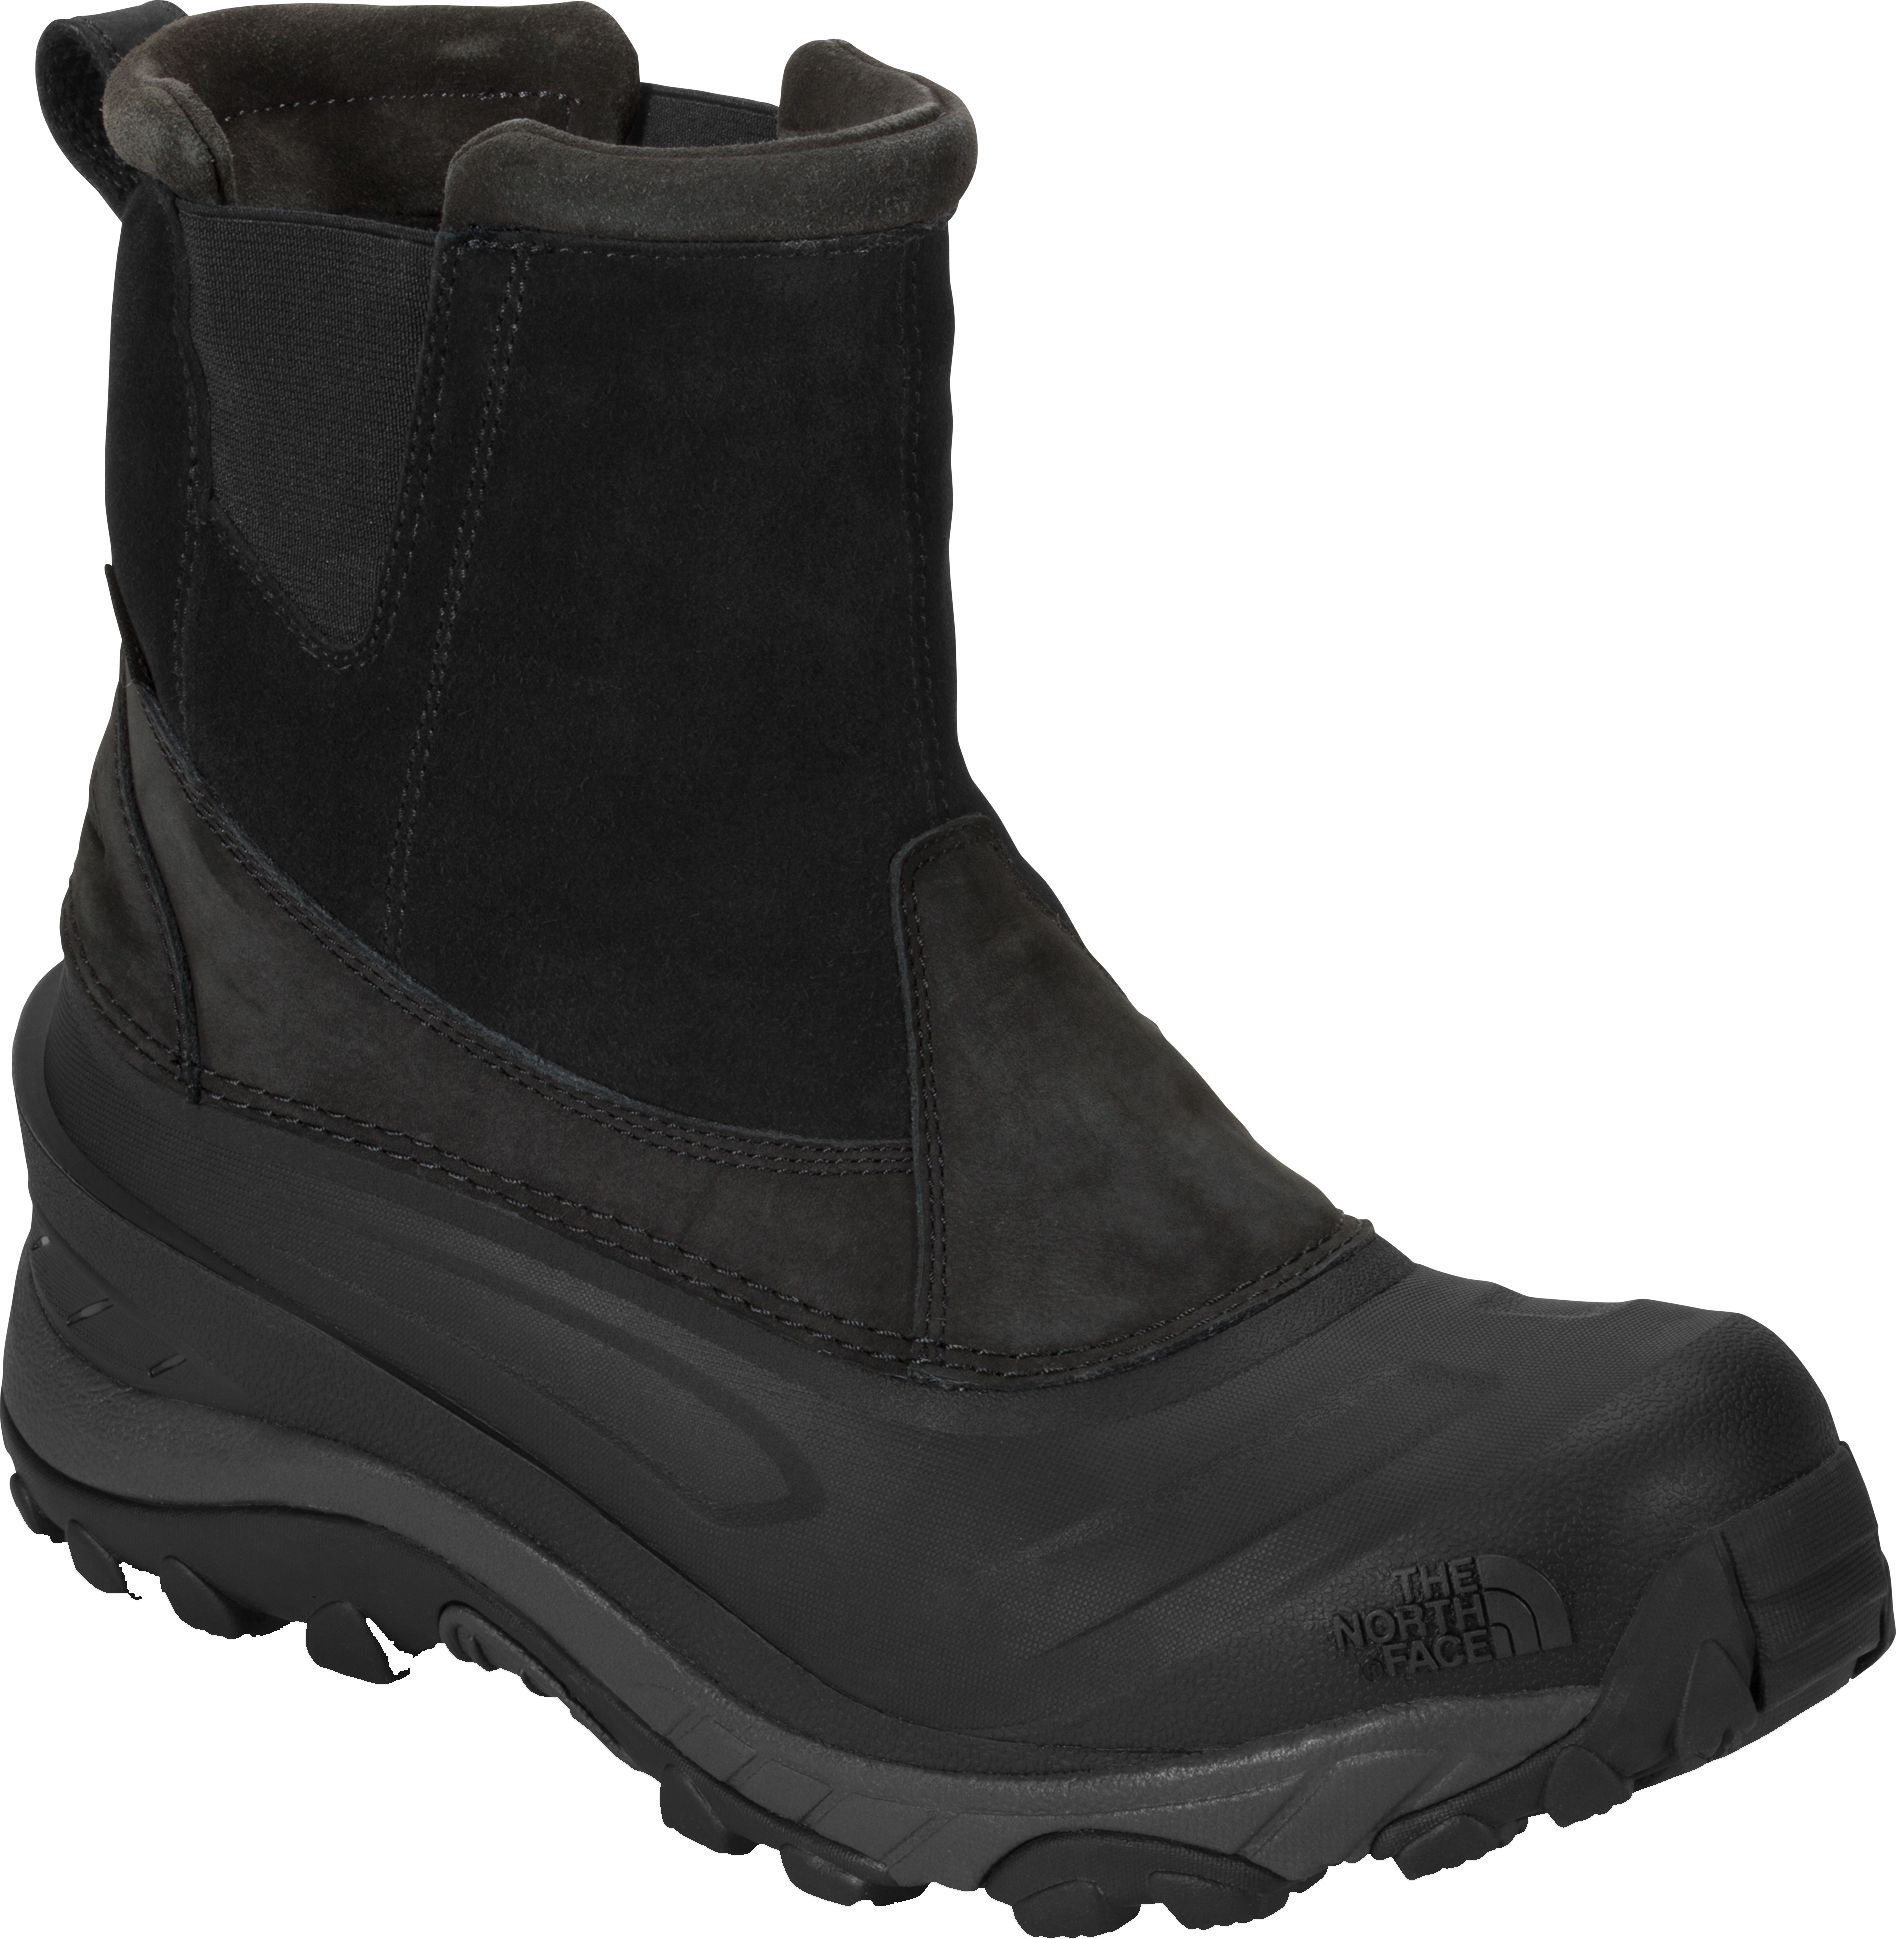 rebel safety boots price